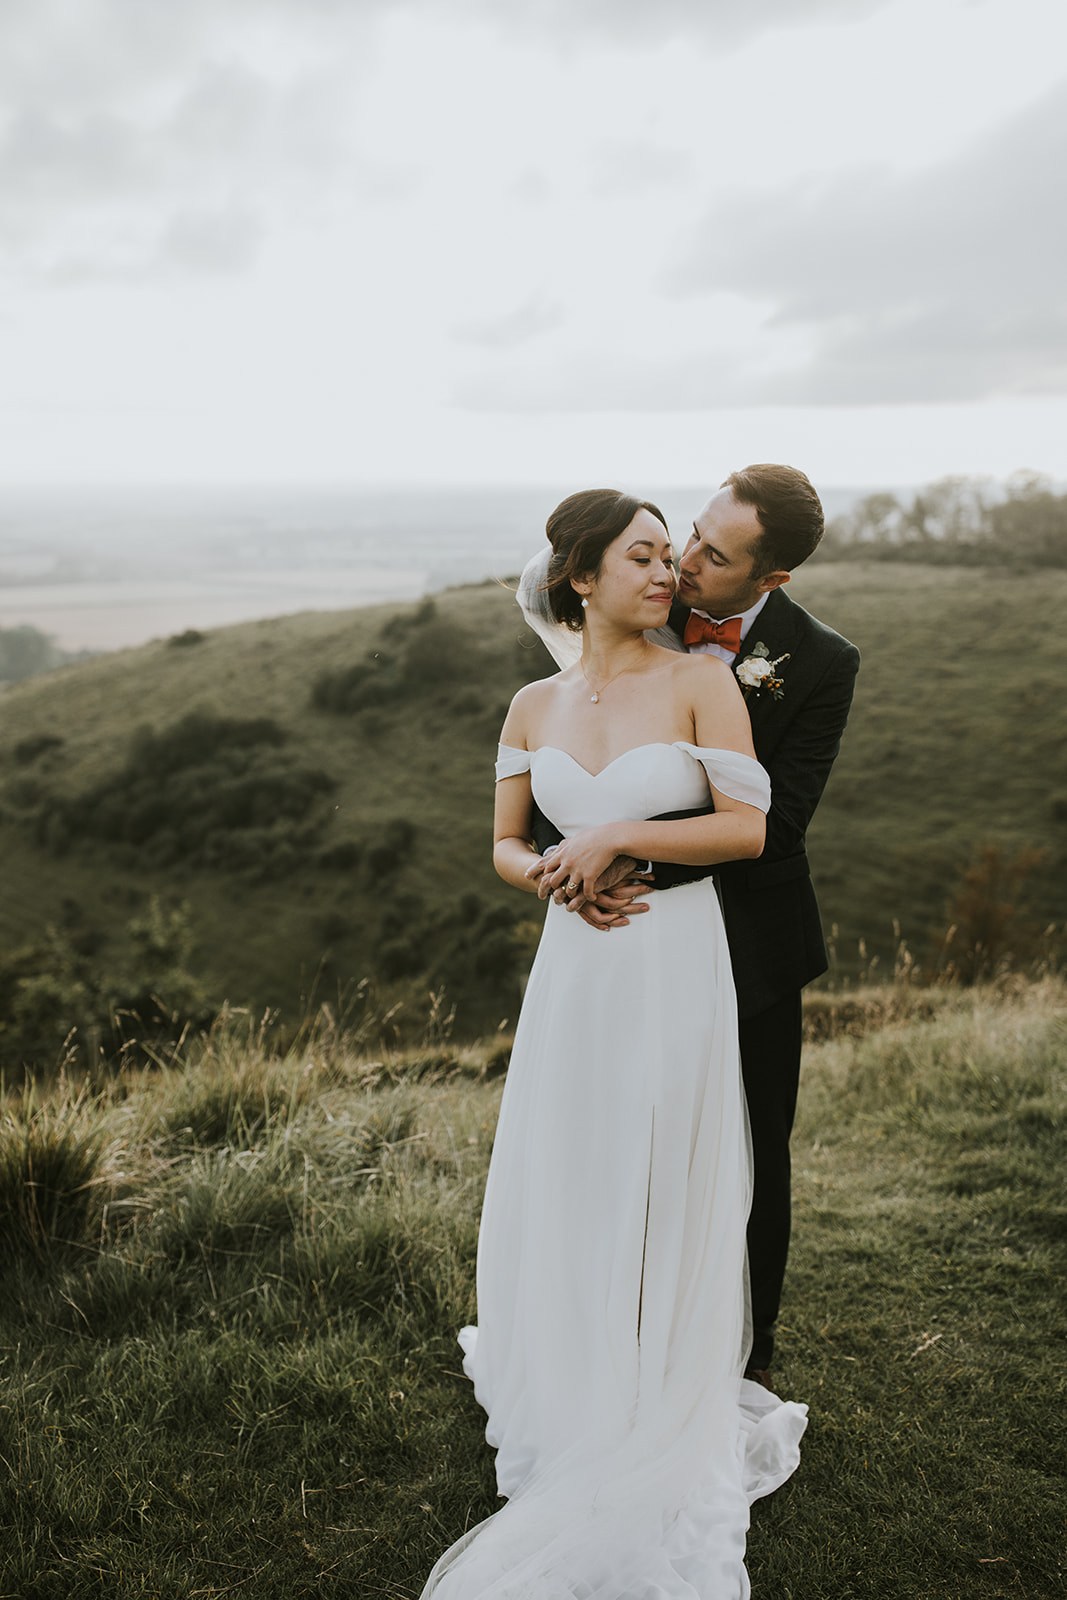 A portrait of the bride and groom on the downs with stunning views as a backdrop